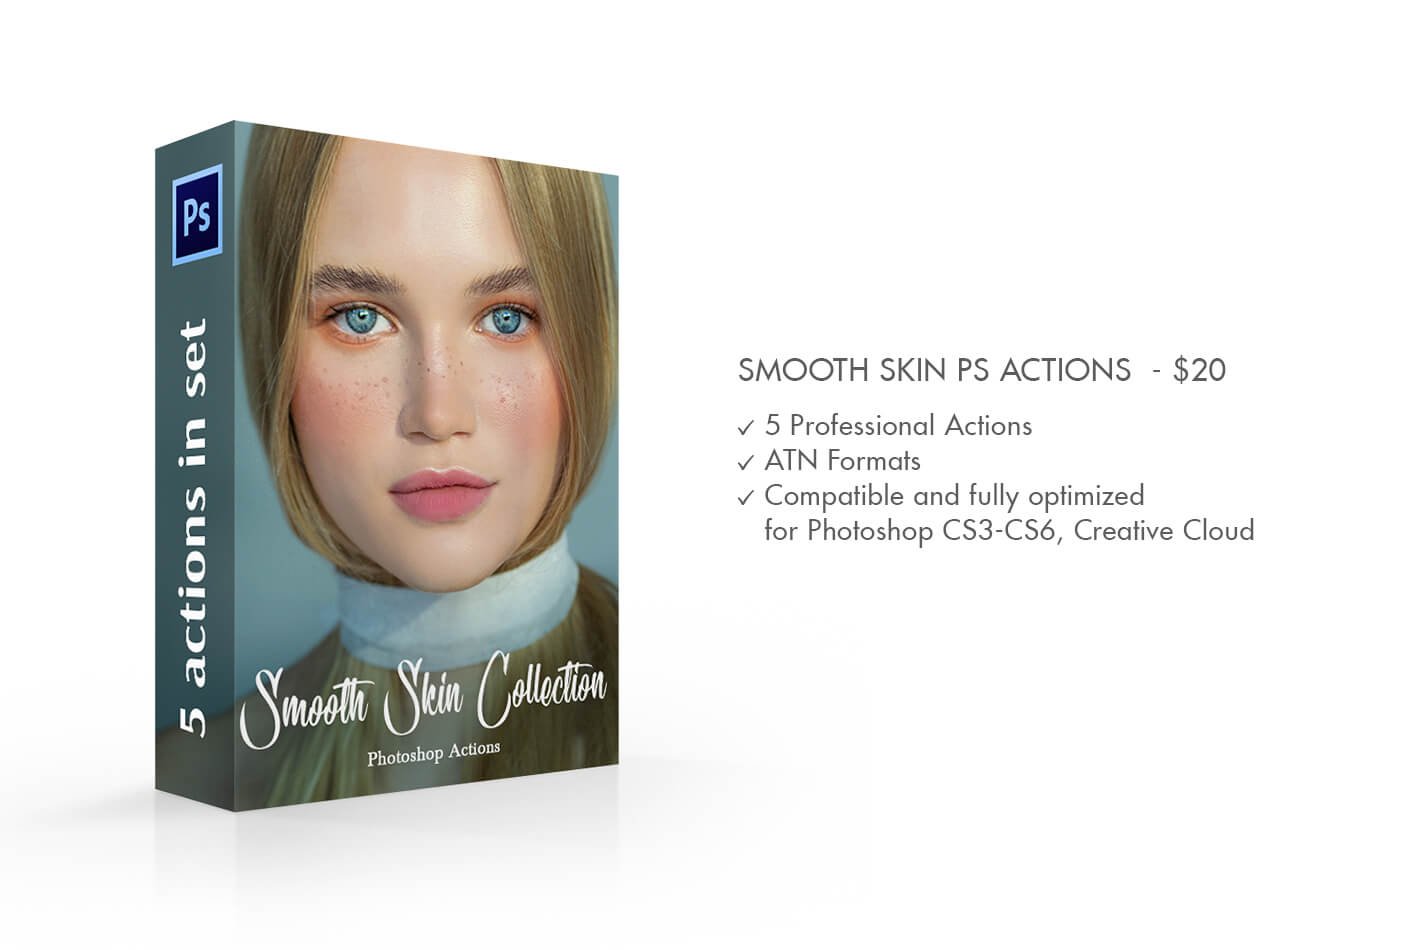 Smooth Skin Photoshop Actionspreview image.